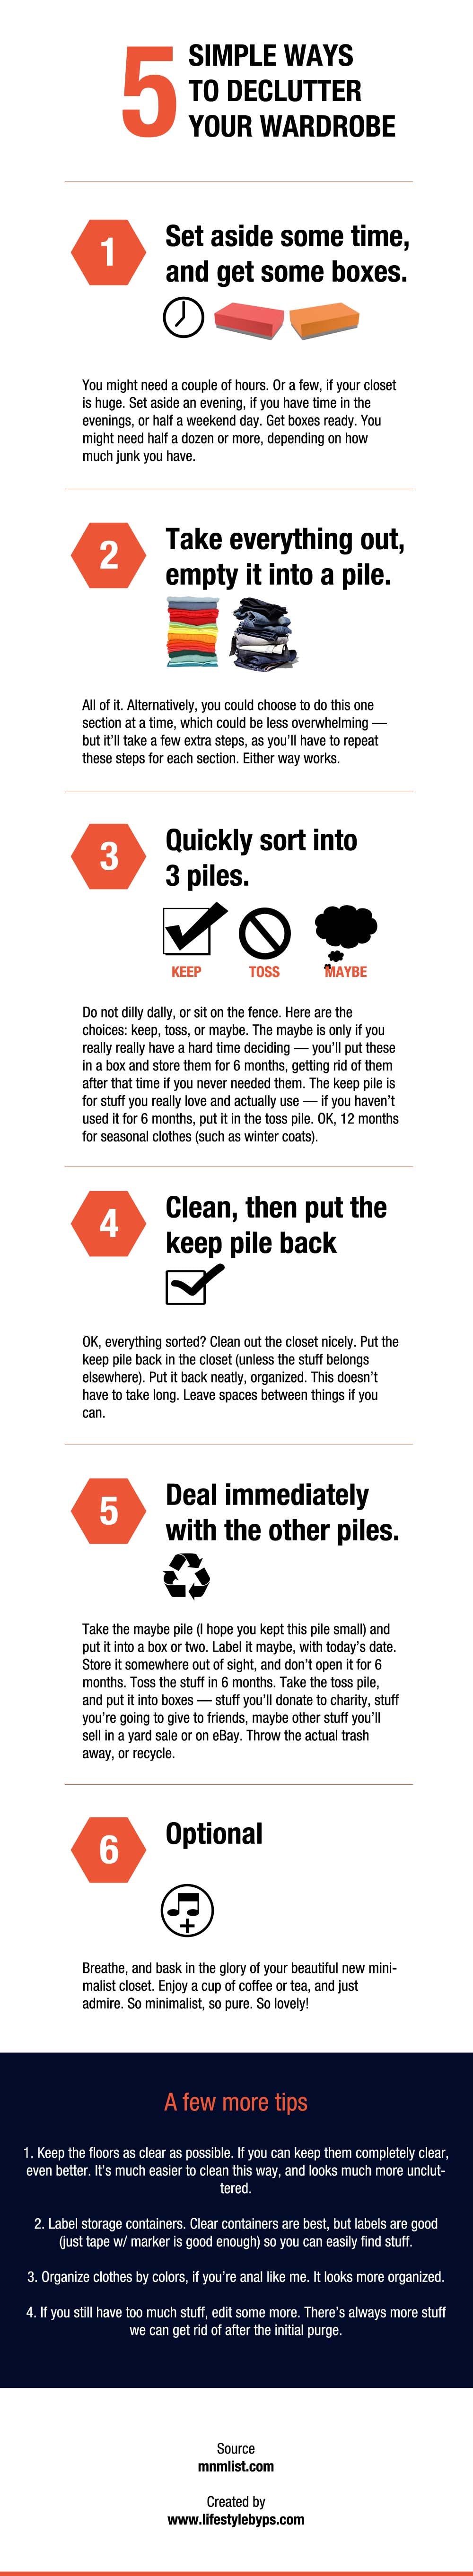 5 simple ways to declutter your wardrobe infographic